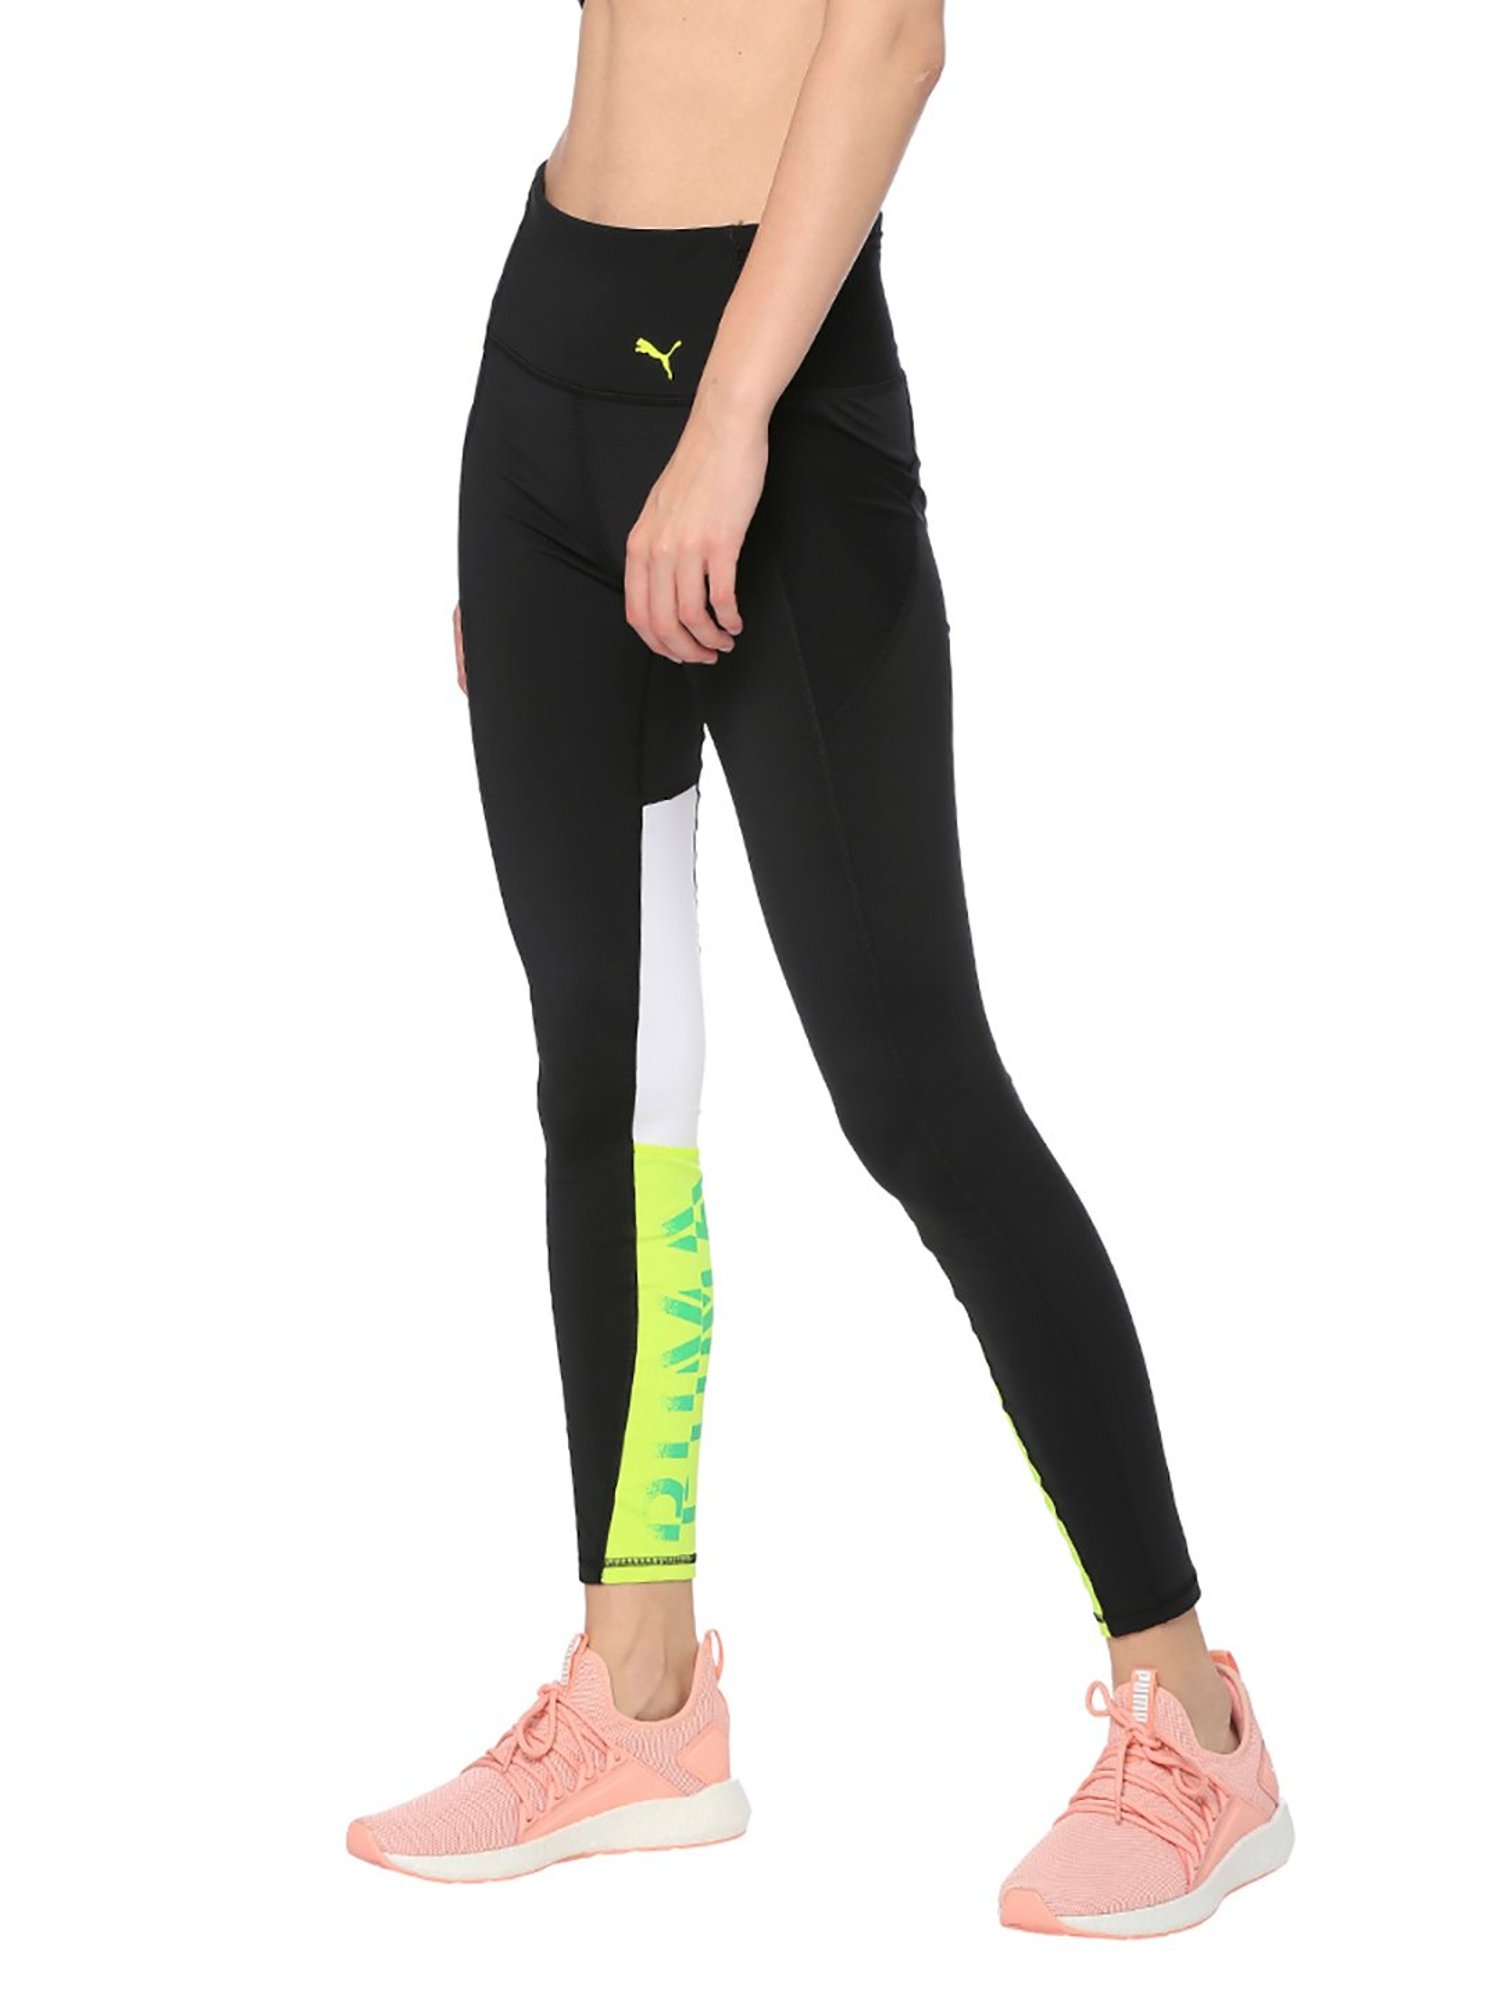 Tooth & Dentist Leggings - Designed By Squeaky Chimp T-shirts & Leggings